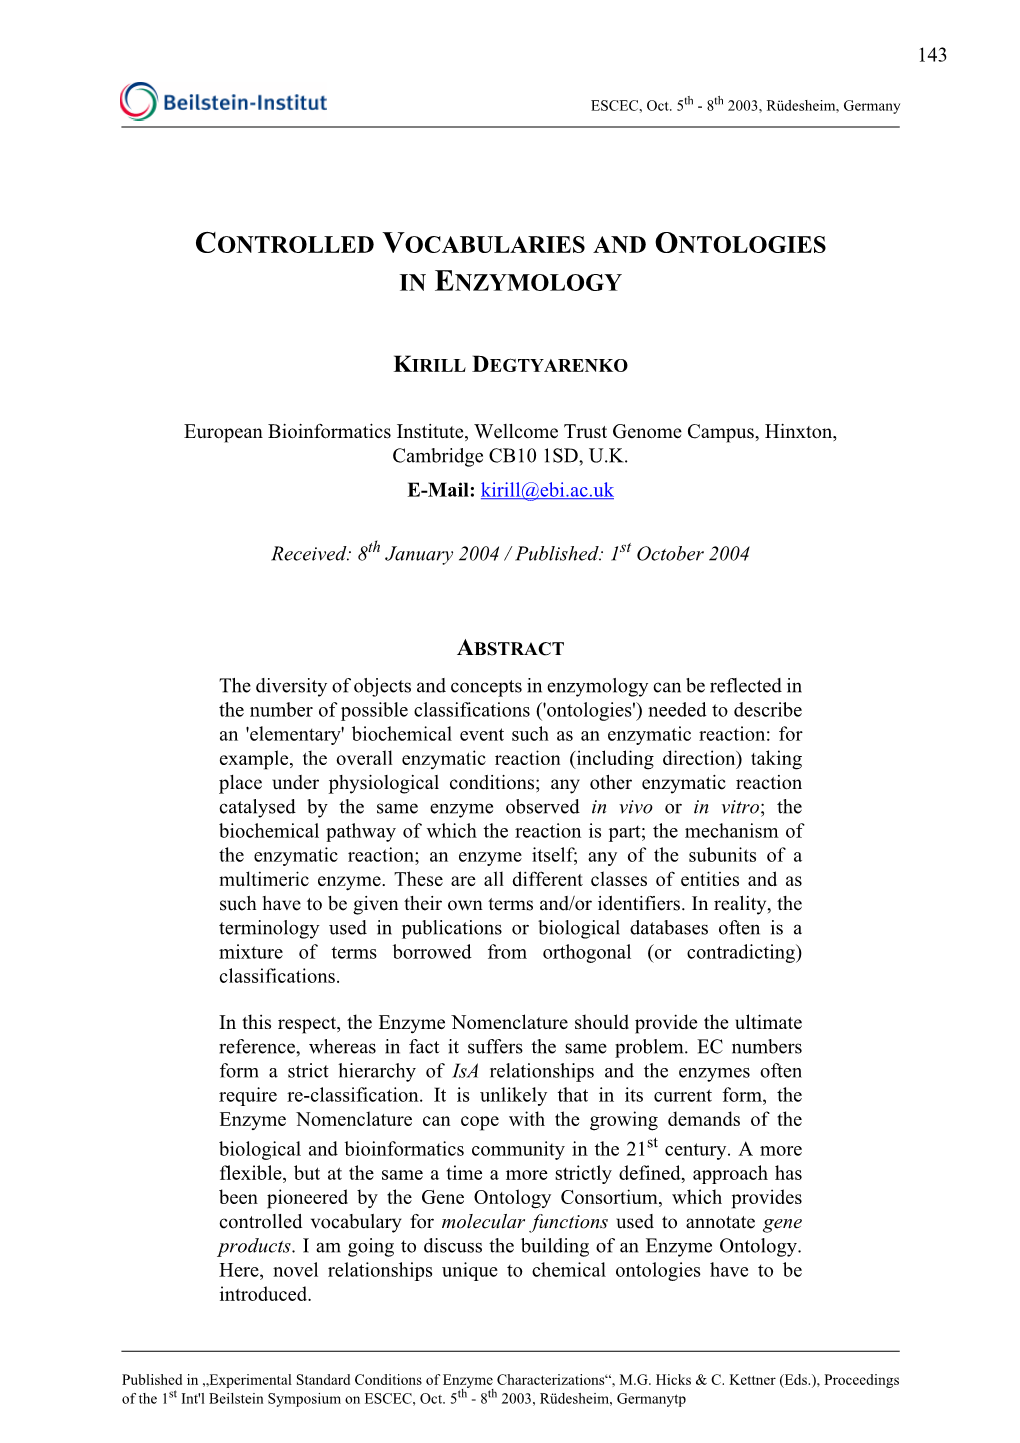 Controlled Vocabularies and Ontologies in Enzymology